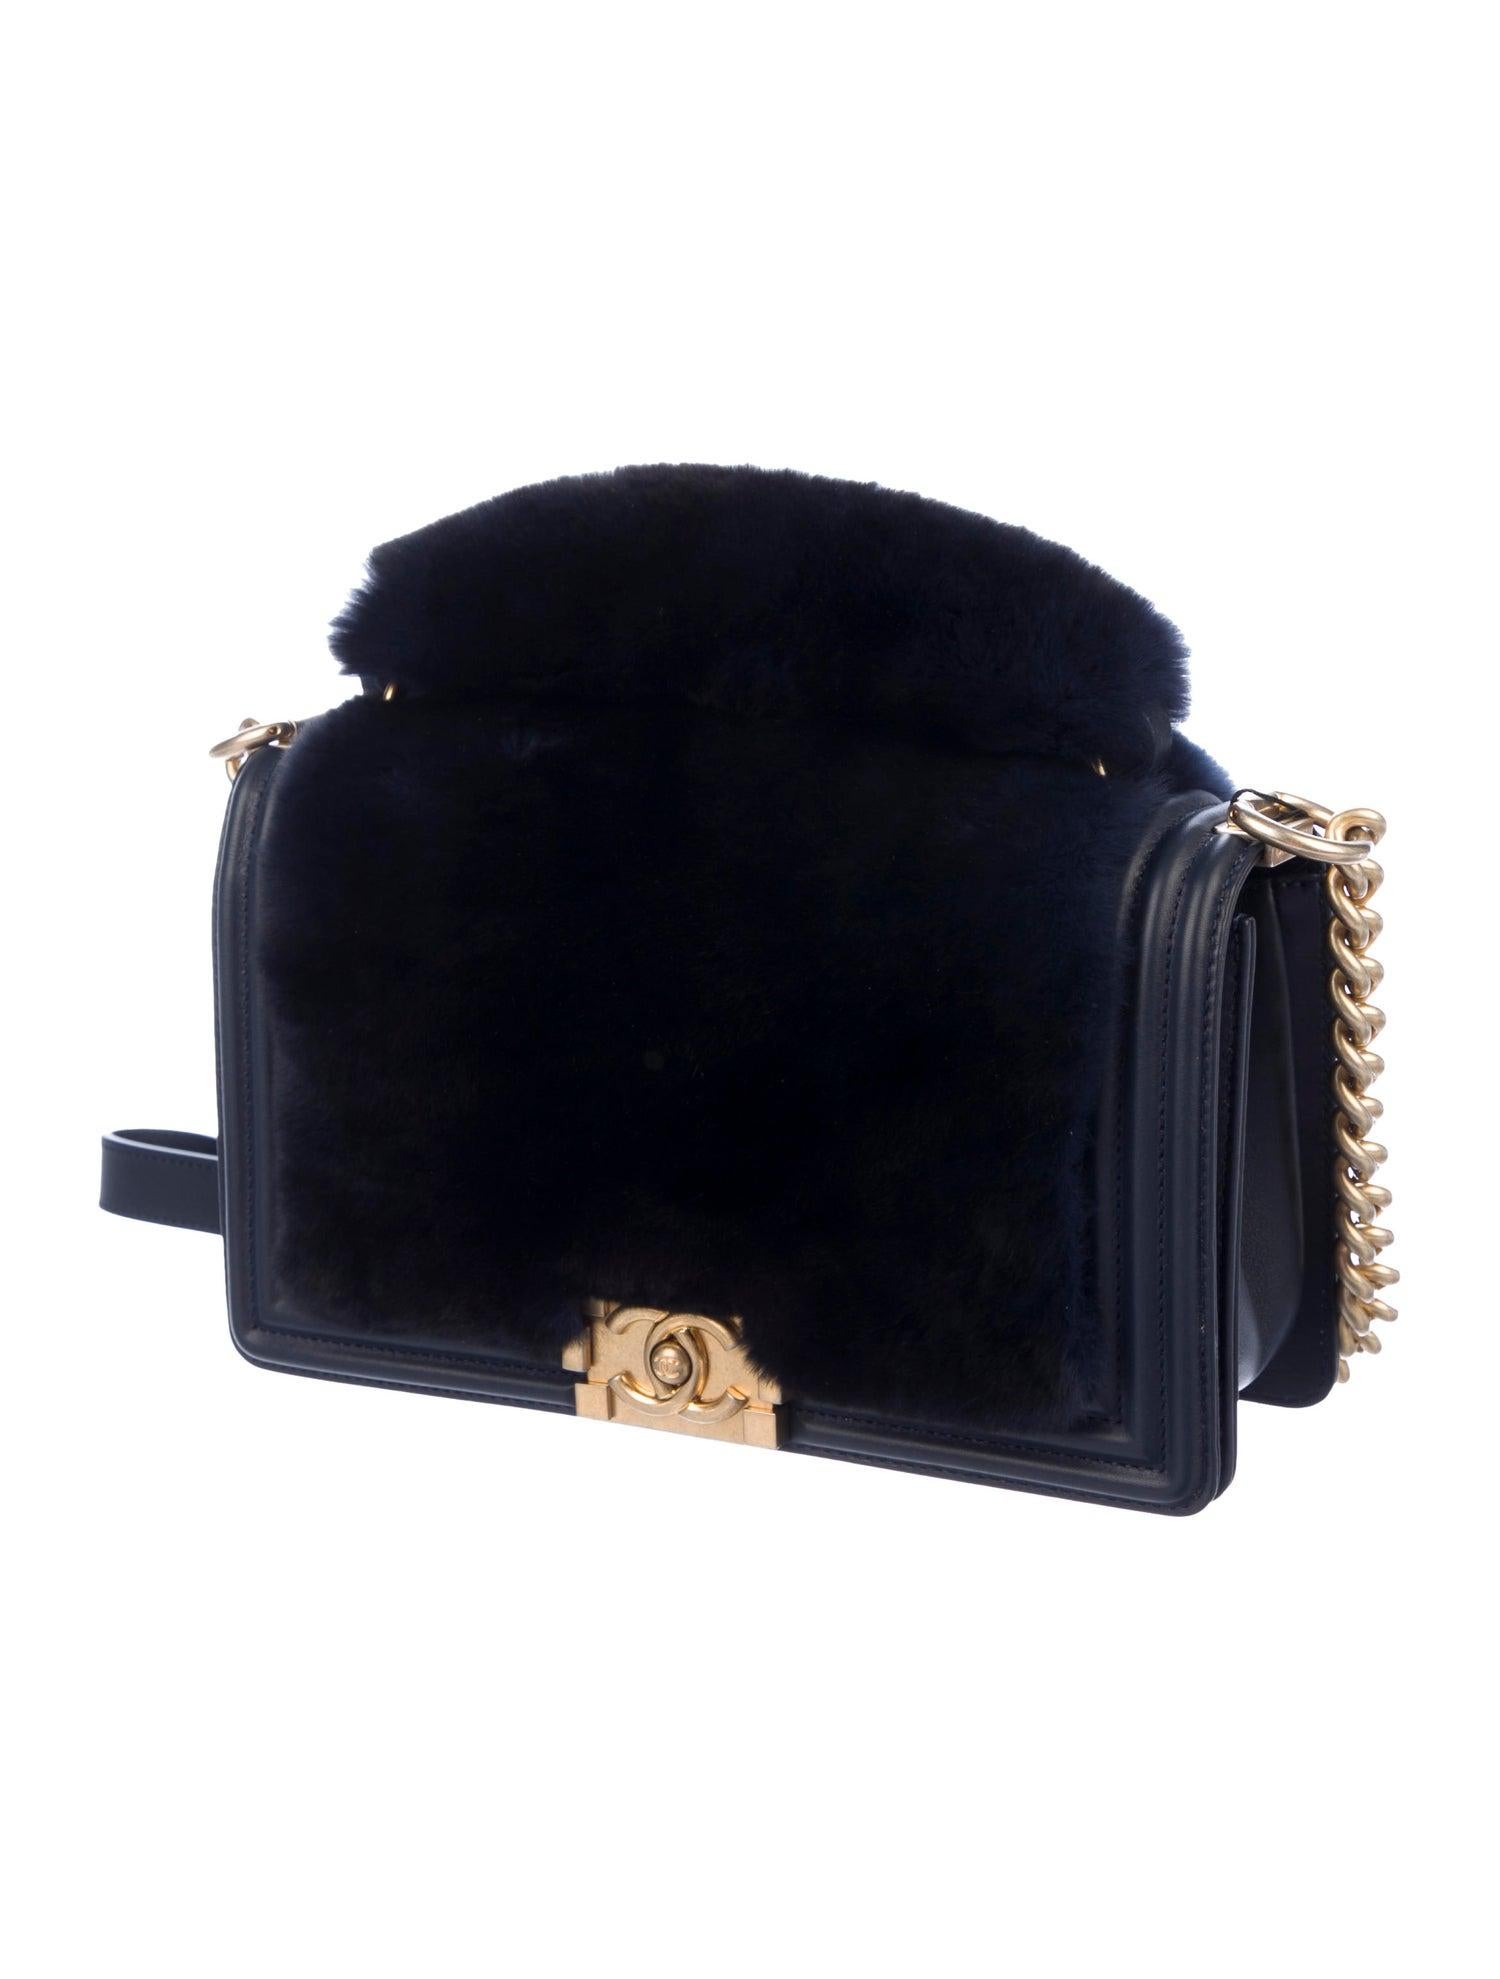 Leather
Rabbit fur
Gold-tone hardware
Leather lining
Push-lock closure 
Made in Italy
Date code present
Shoulder drop 22